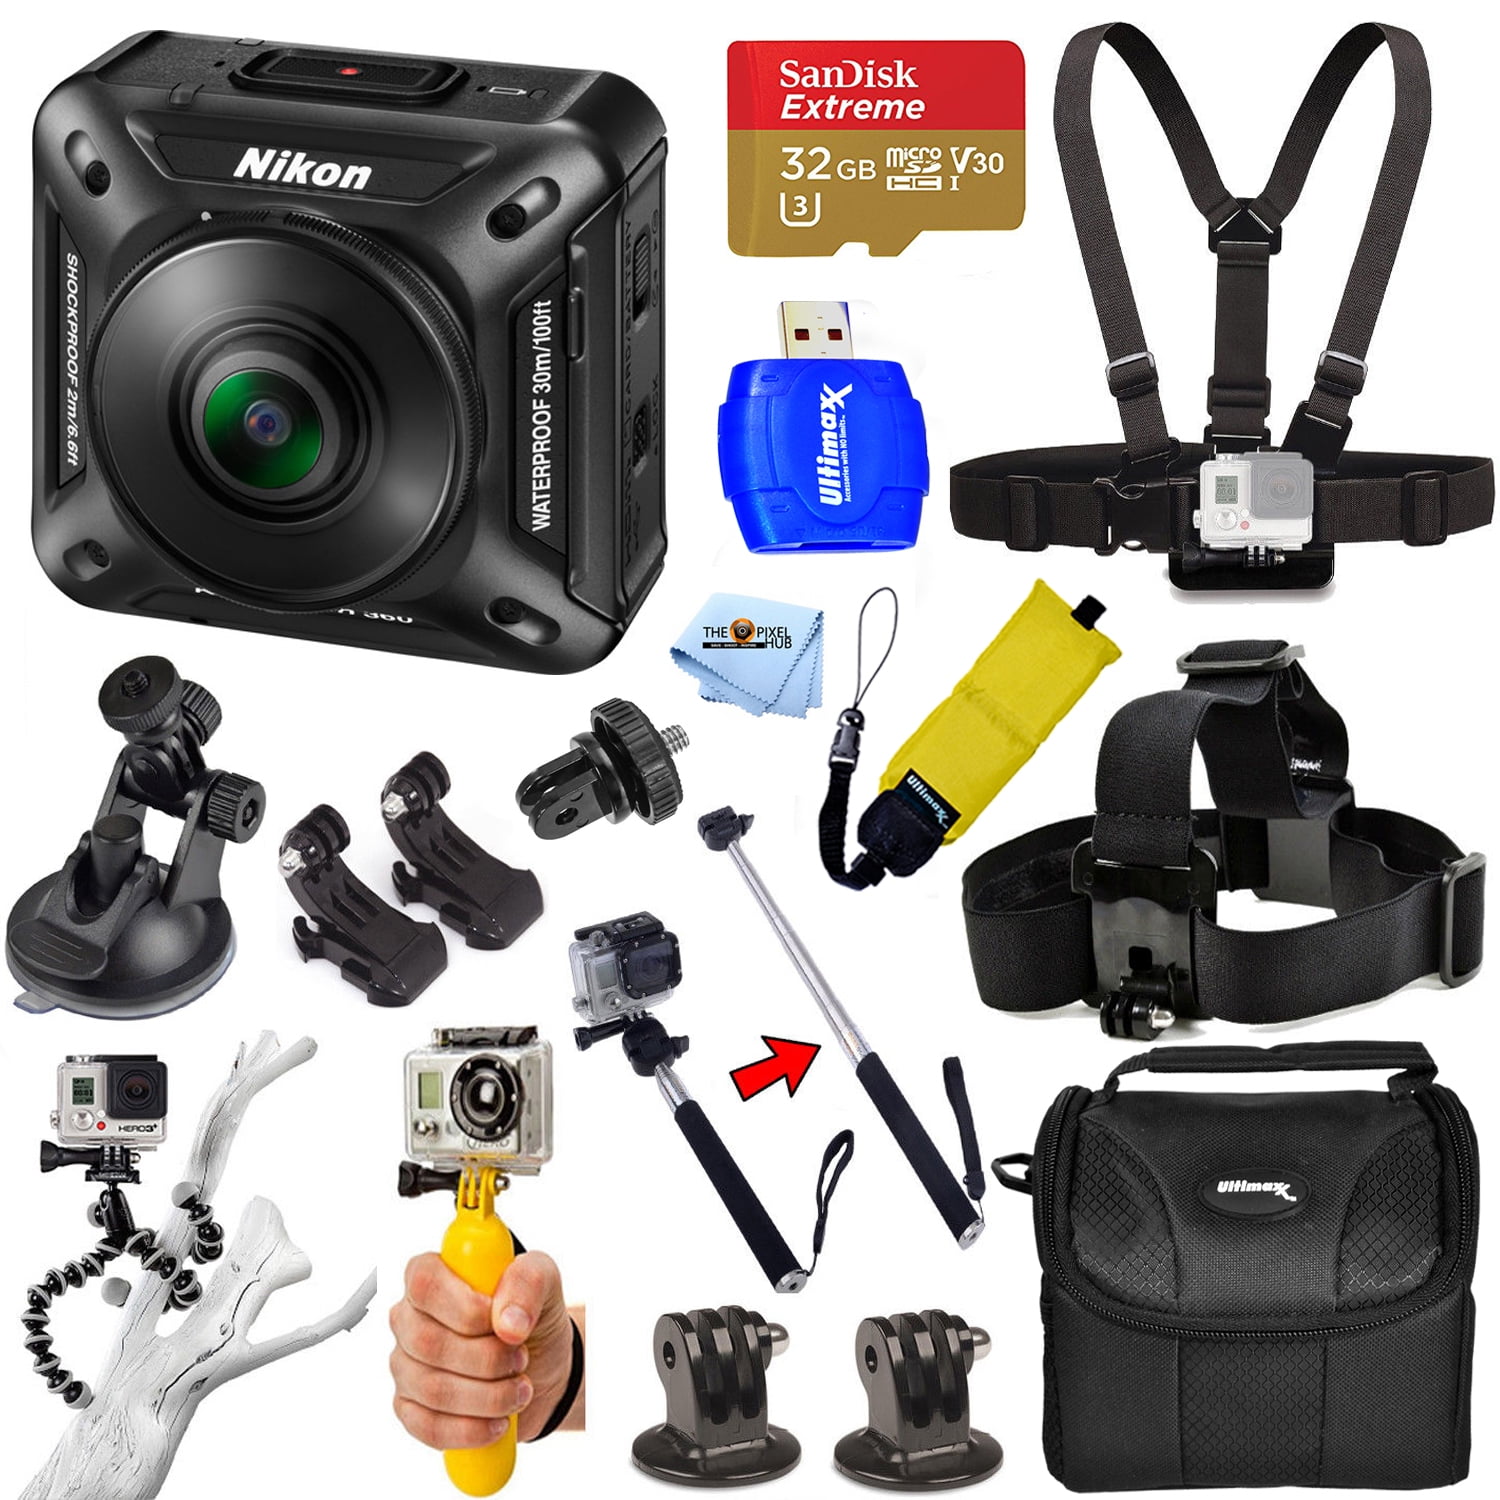 crash studio total Nikon KeyMission 360 UHD 4K Action Camera (Black) #26513 ALL IN 1 PRO  ACTION ACCESSORY KIT with Chest Strap Mount, Head Strap Mount, Selfie  Stick, Floating Bobber Handle + MUCH MORE - Walmart.com